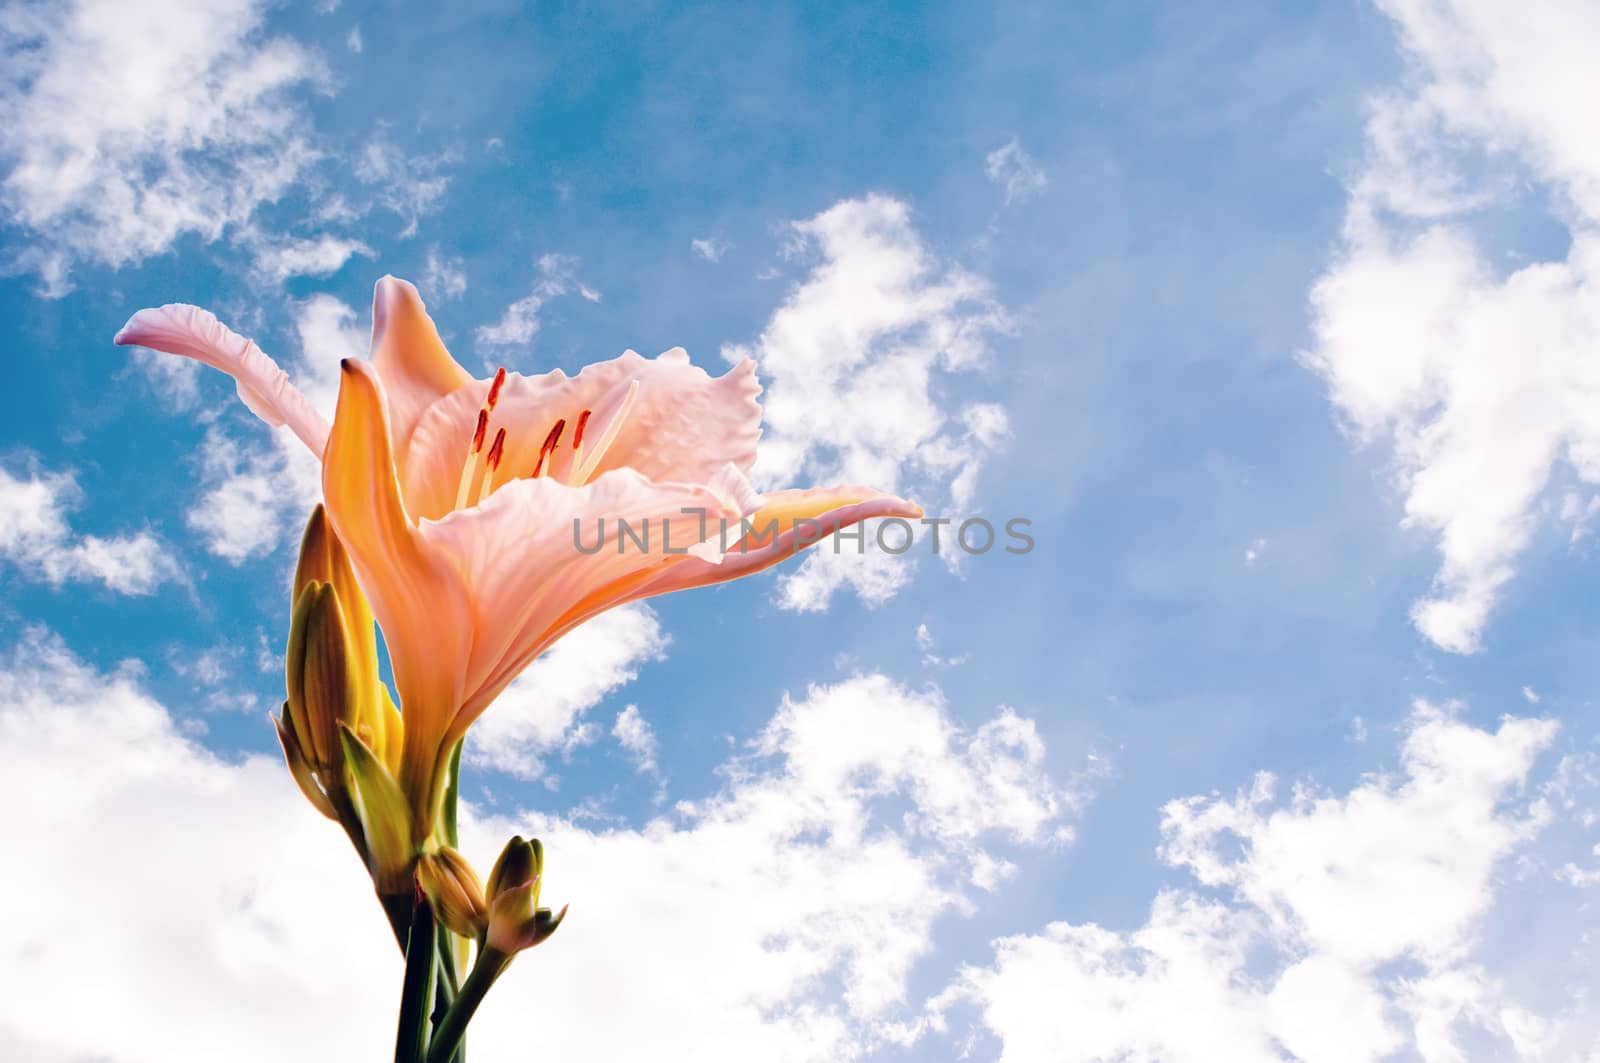 Single lily with pink and yellow petals against a summer sky.